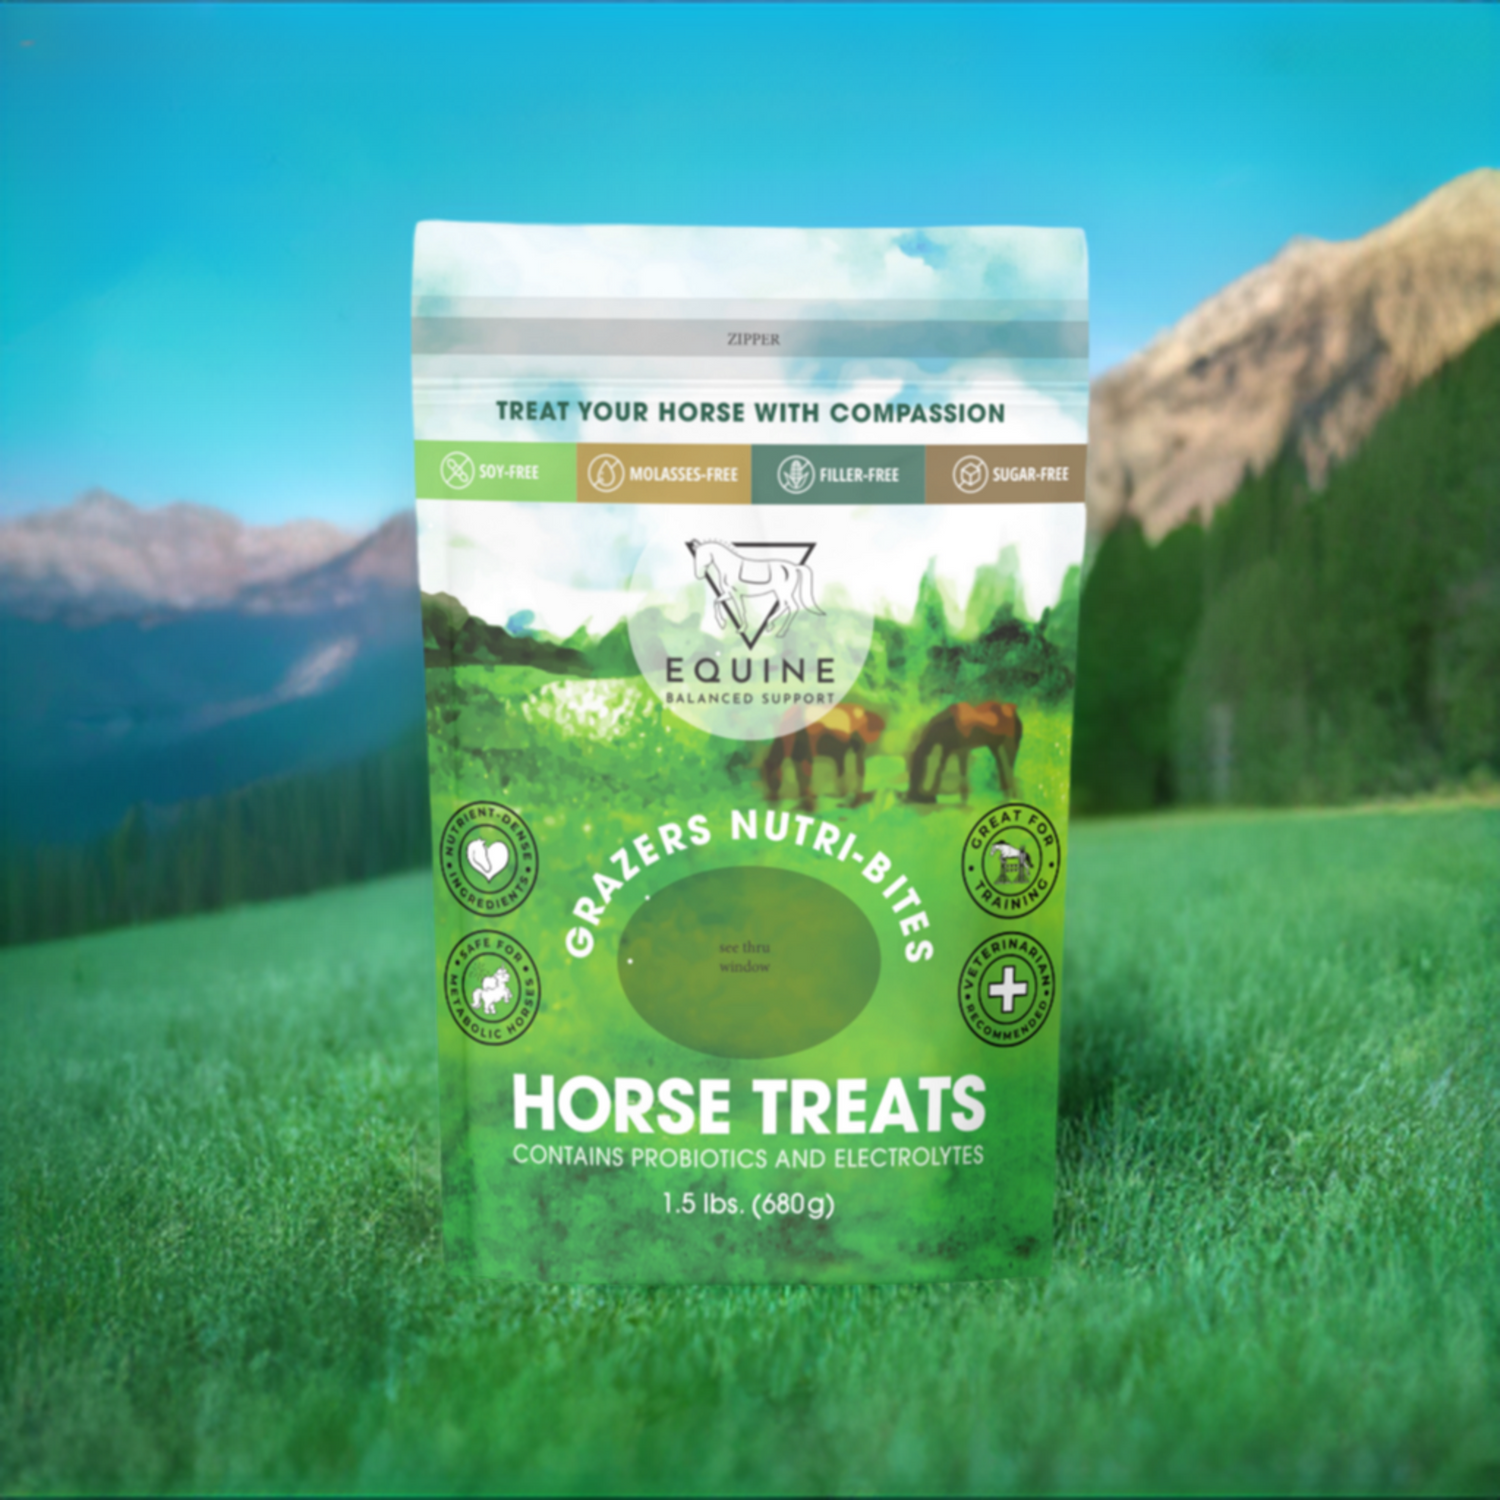 Top-rated horse supplements and products in Best Sellers Collection featuring joint, digestive, and coat health products.